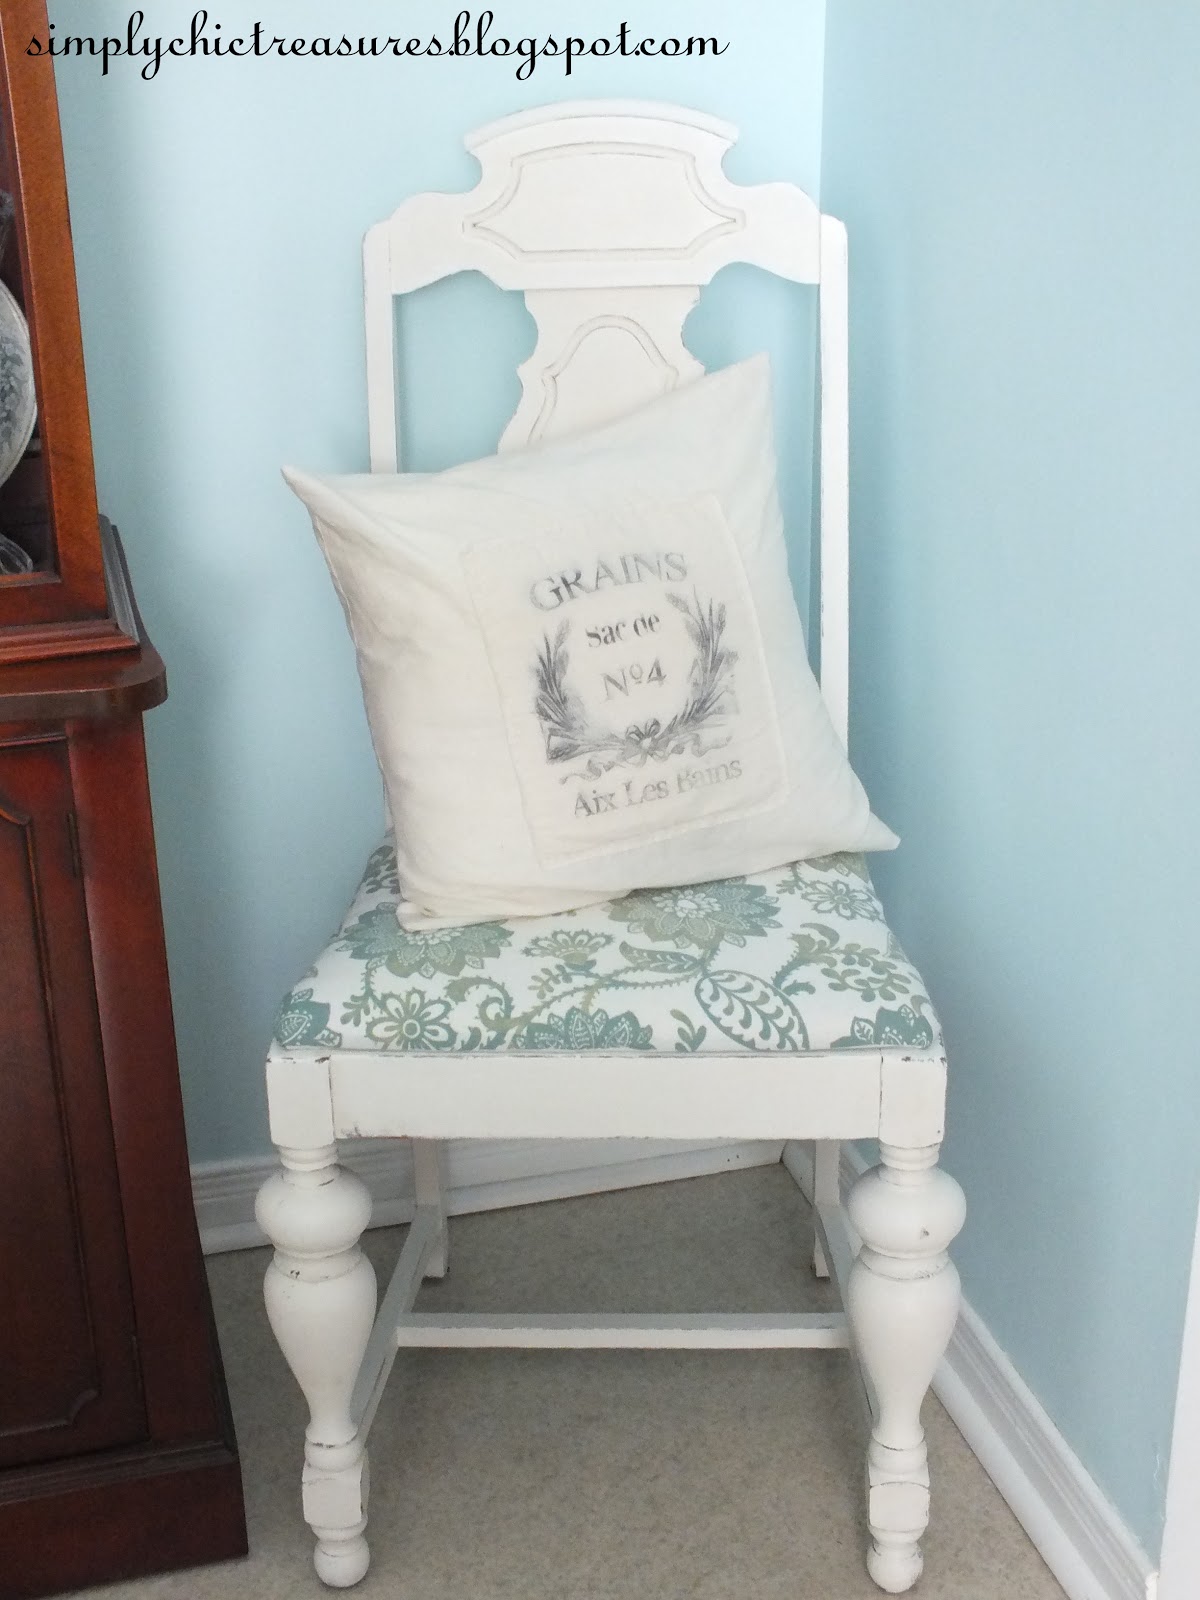 simply chic treasures Two Chair Makeovers